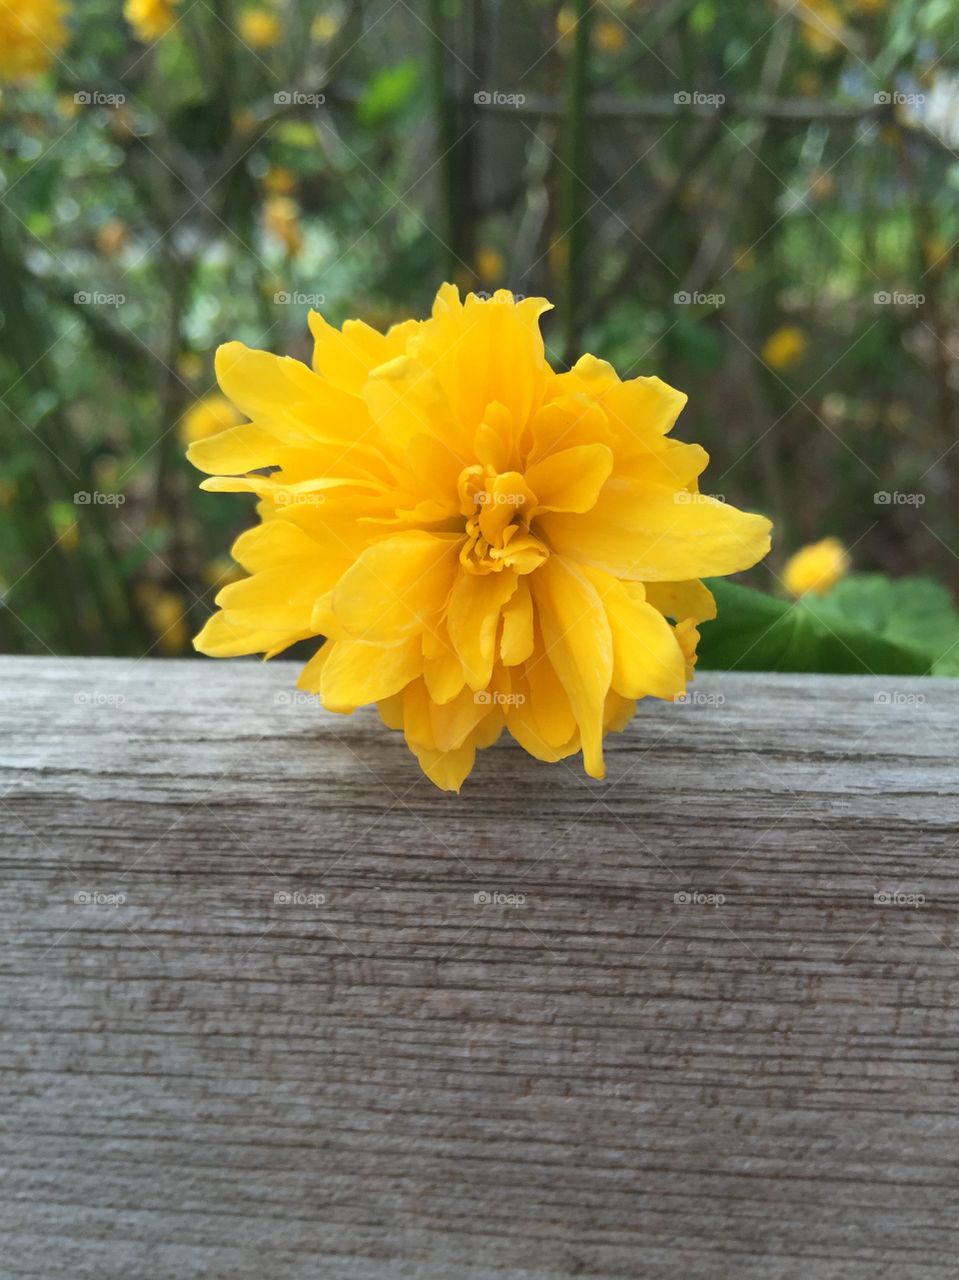 Yellow Flower. Lonely yellow flower on a wood bench